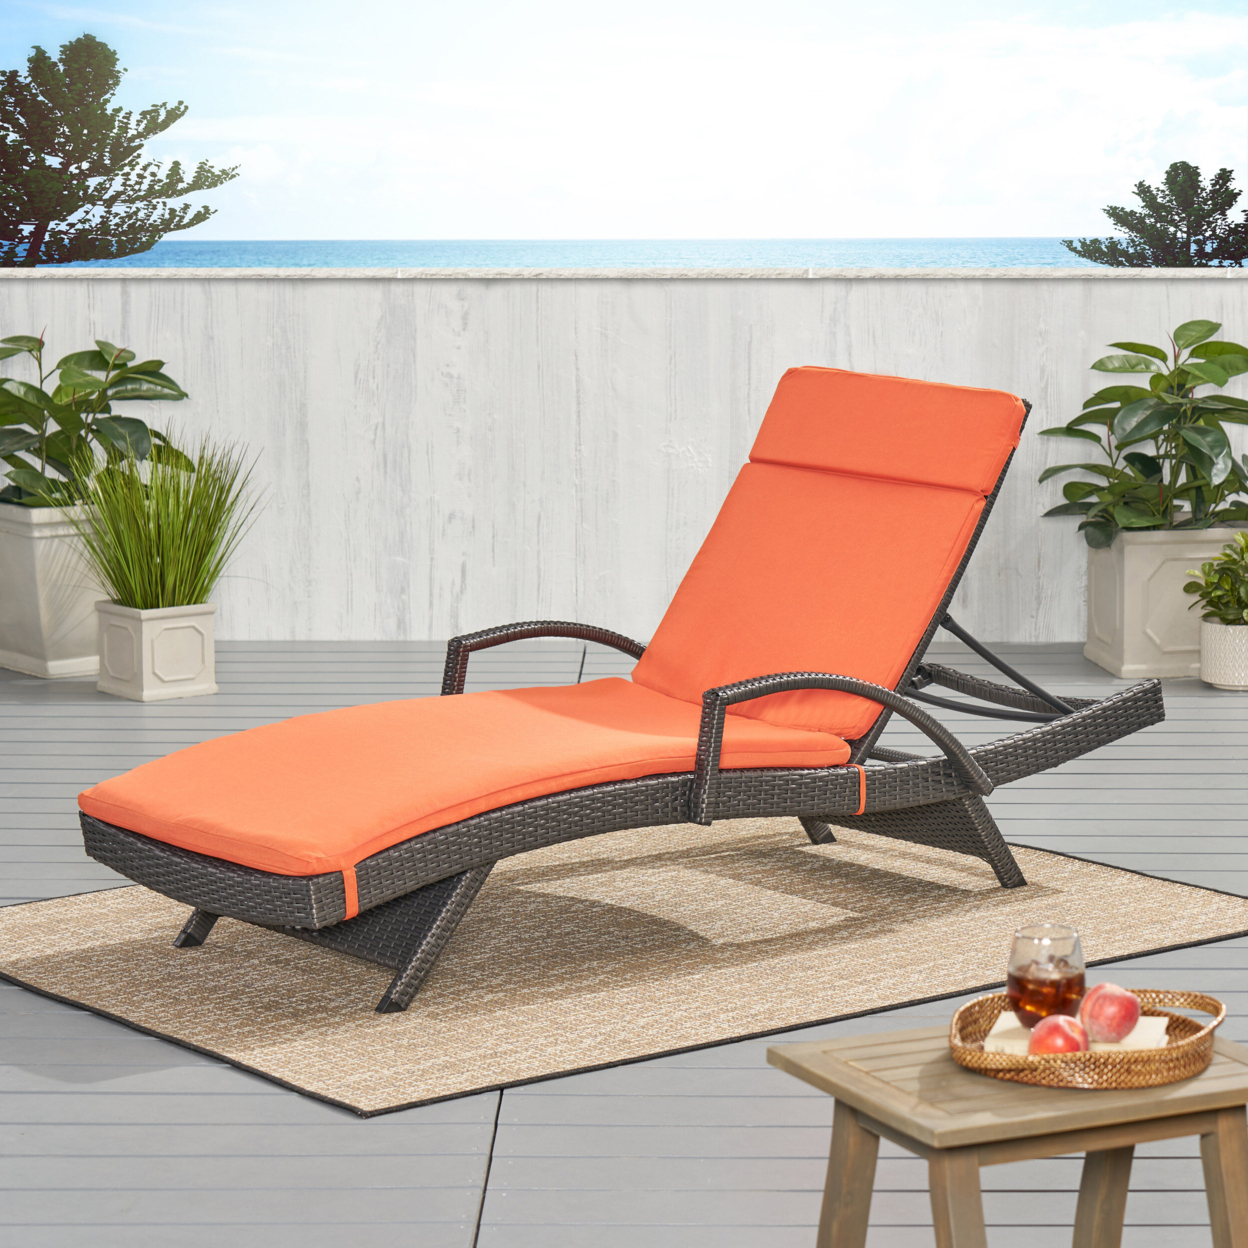 Soleil Outdoor Water Resistant Chaise Lounge Cushion - Orange